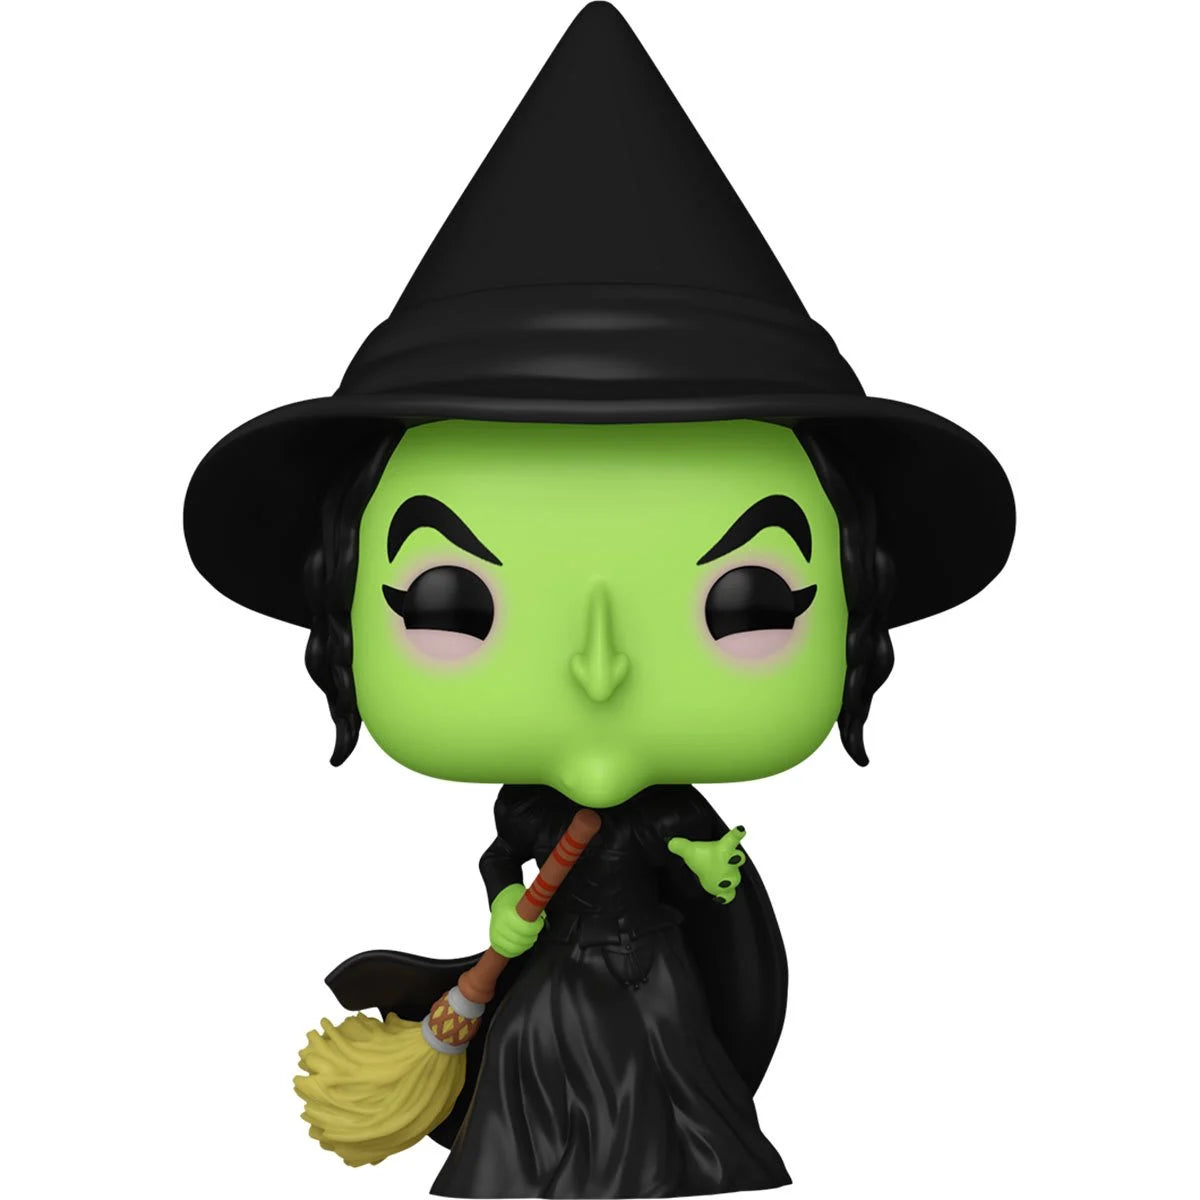 Funko Pop! The Wizard of Oz 85th Anniversary Wicked Witch Vinyl Figure #1519